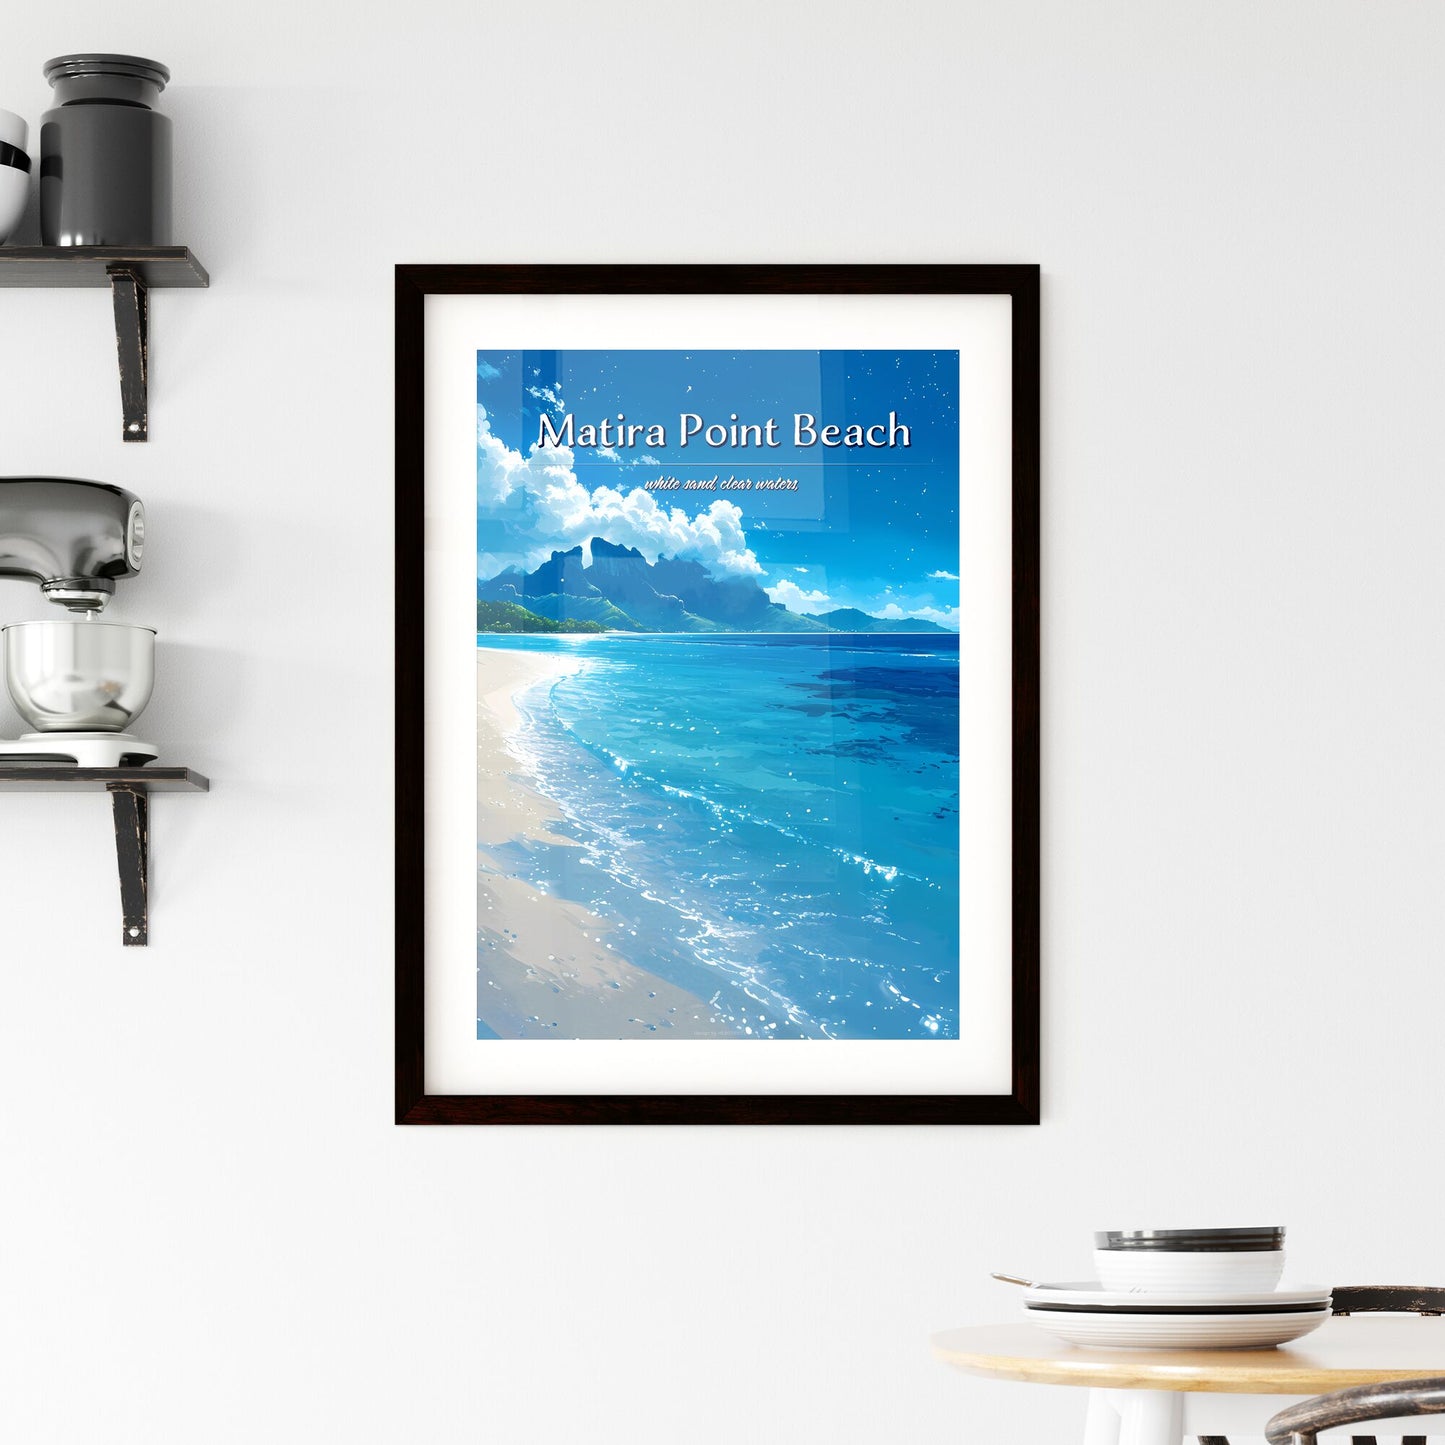 Matira Point Beach - Art print of a beach with blue water and mountains in the background Default Title